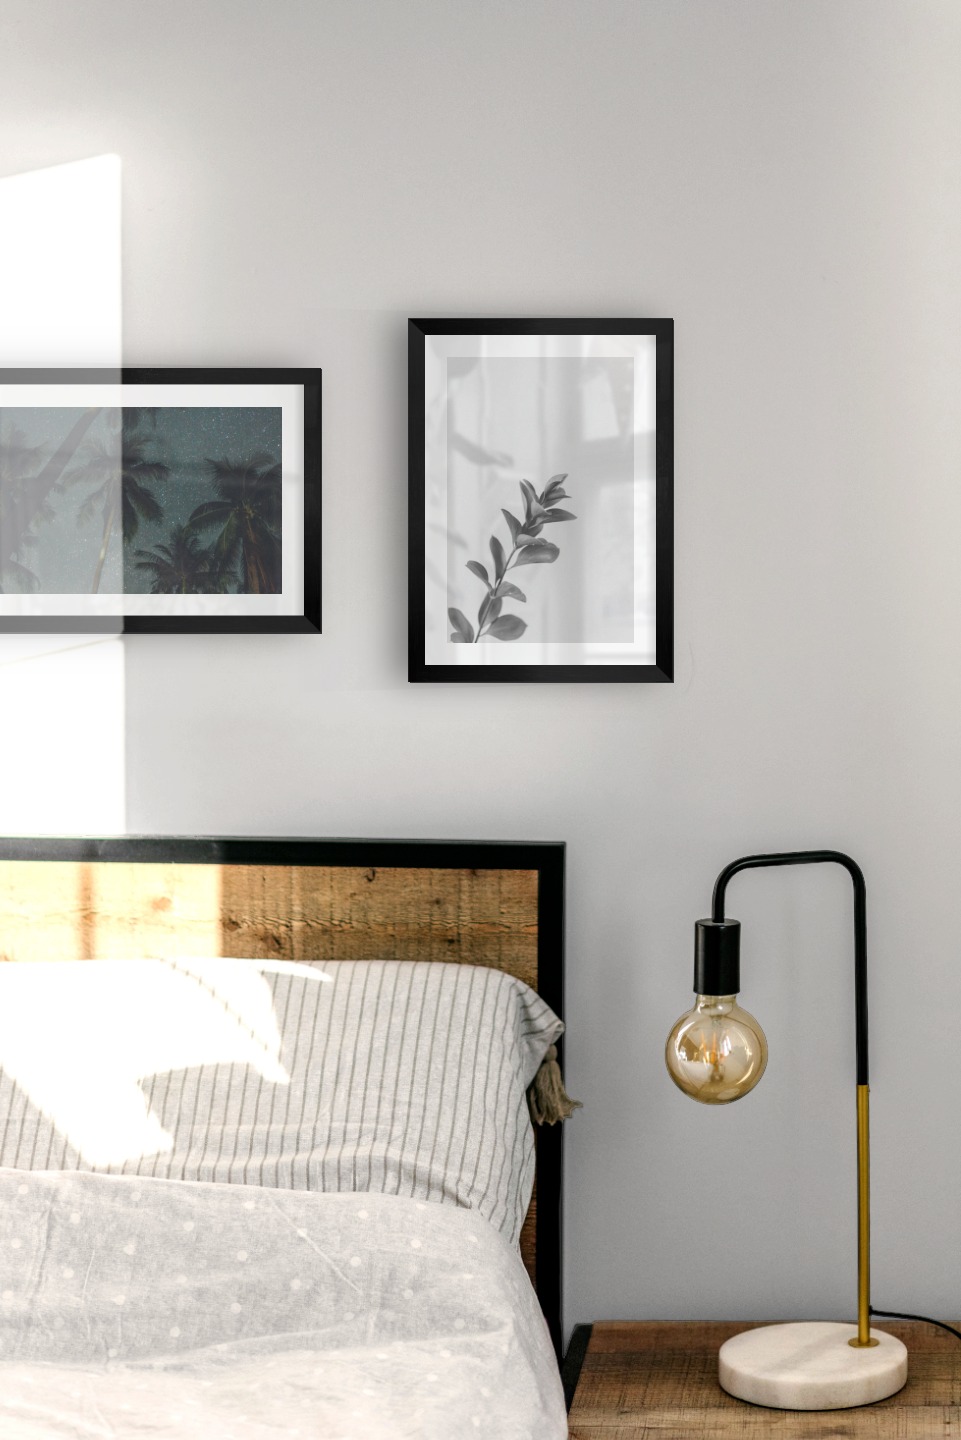 Gallery wall with picture frames in black in sizes 21x30 with prints "Palm trees and night sky" and "Twig"